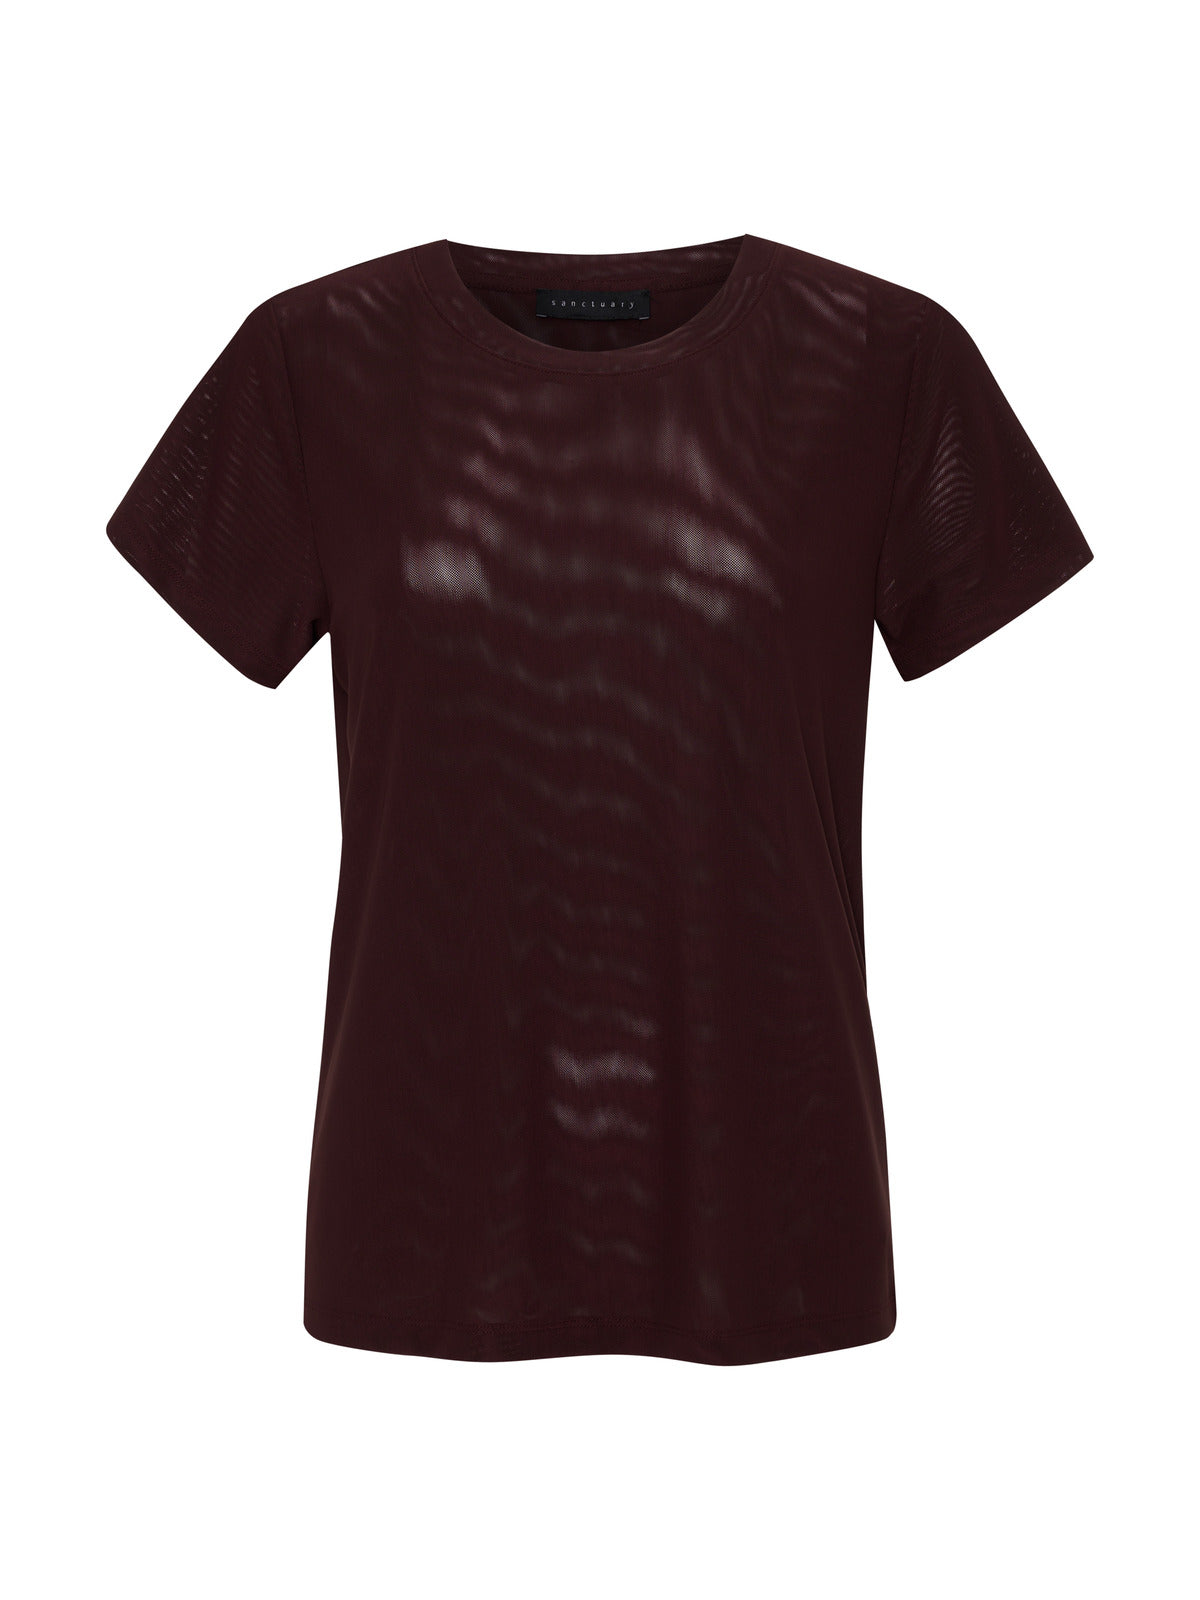 Perfect Mesh Tee Dark Cherry Inclusive Collection